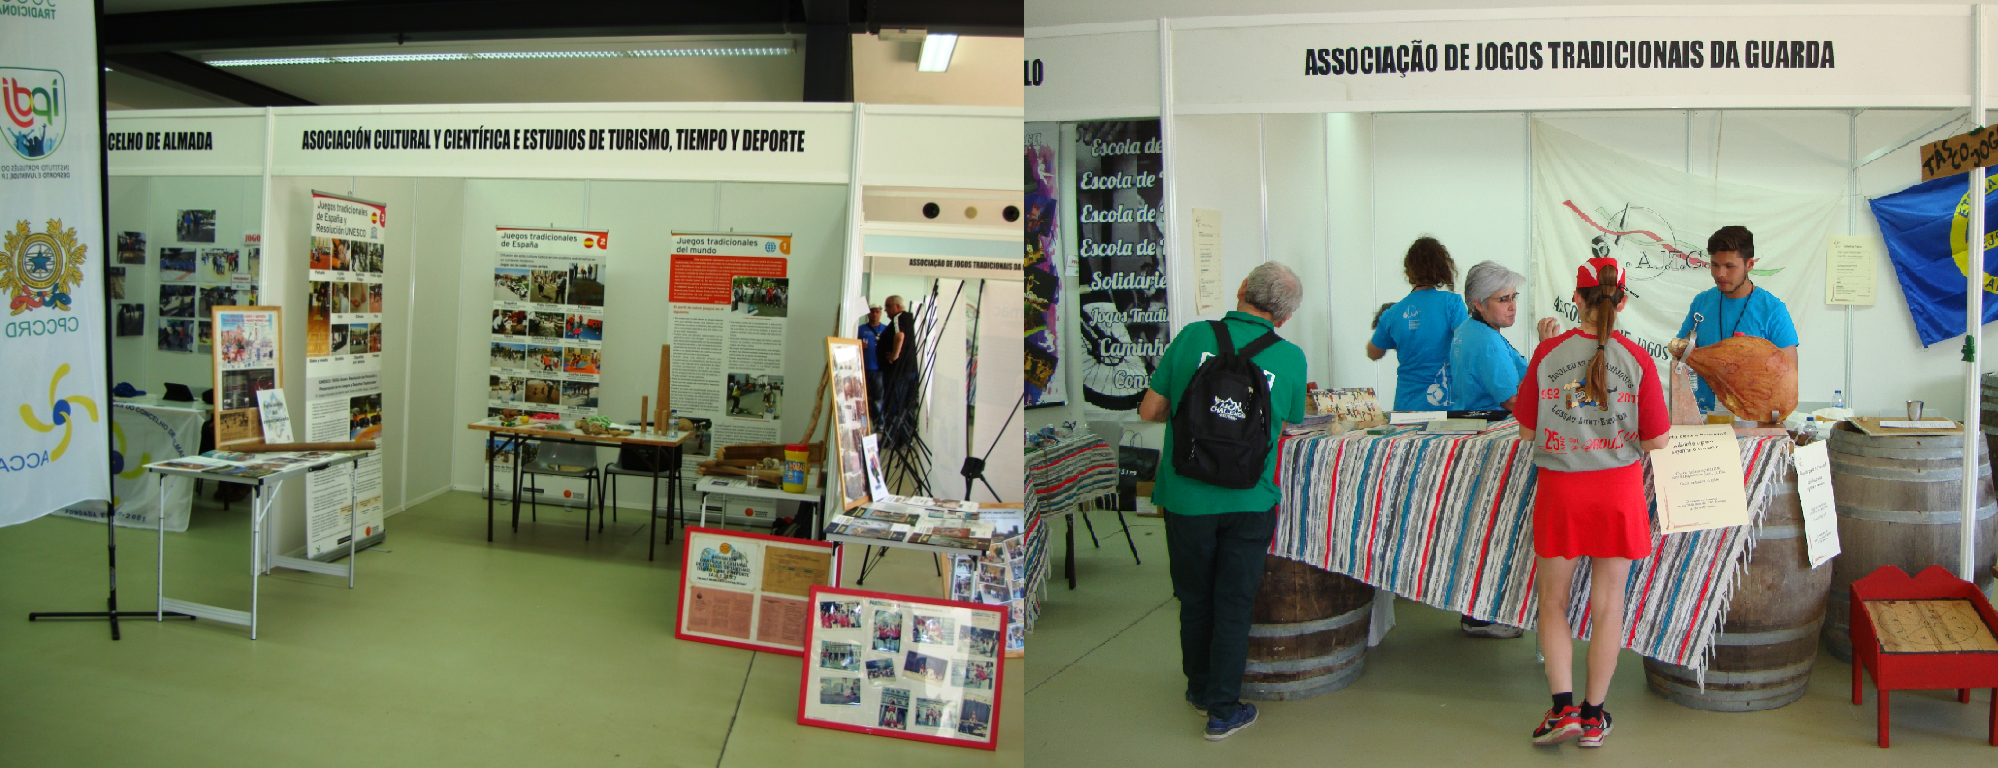 The stands of the Spanish Association AccETTD and the Portuguese Association of Traditional Games from Guarda (AJTG).